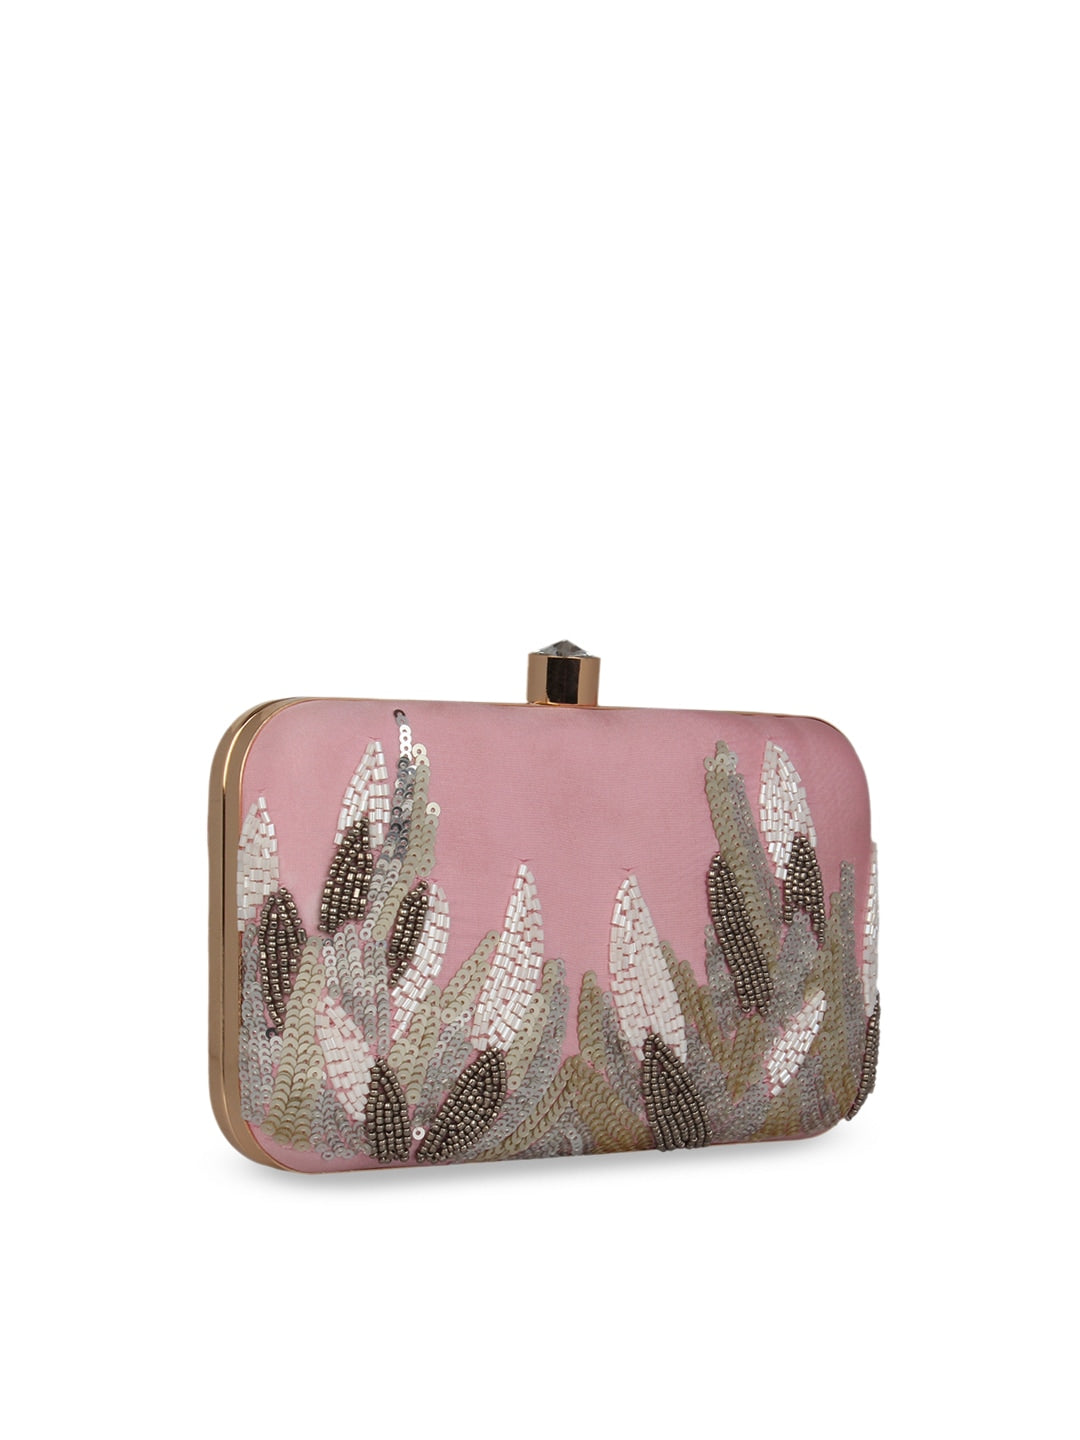 Anekaant Pink Sequin Embellished Clutch - Distacart